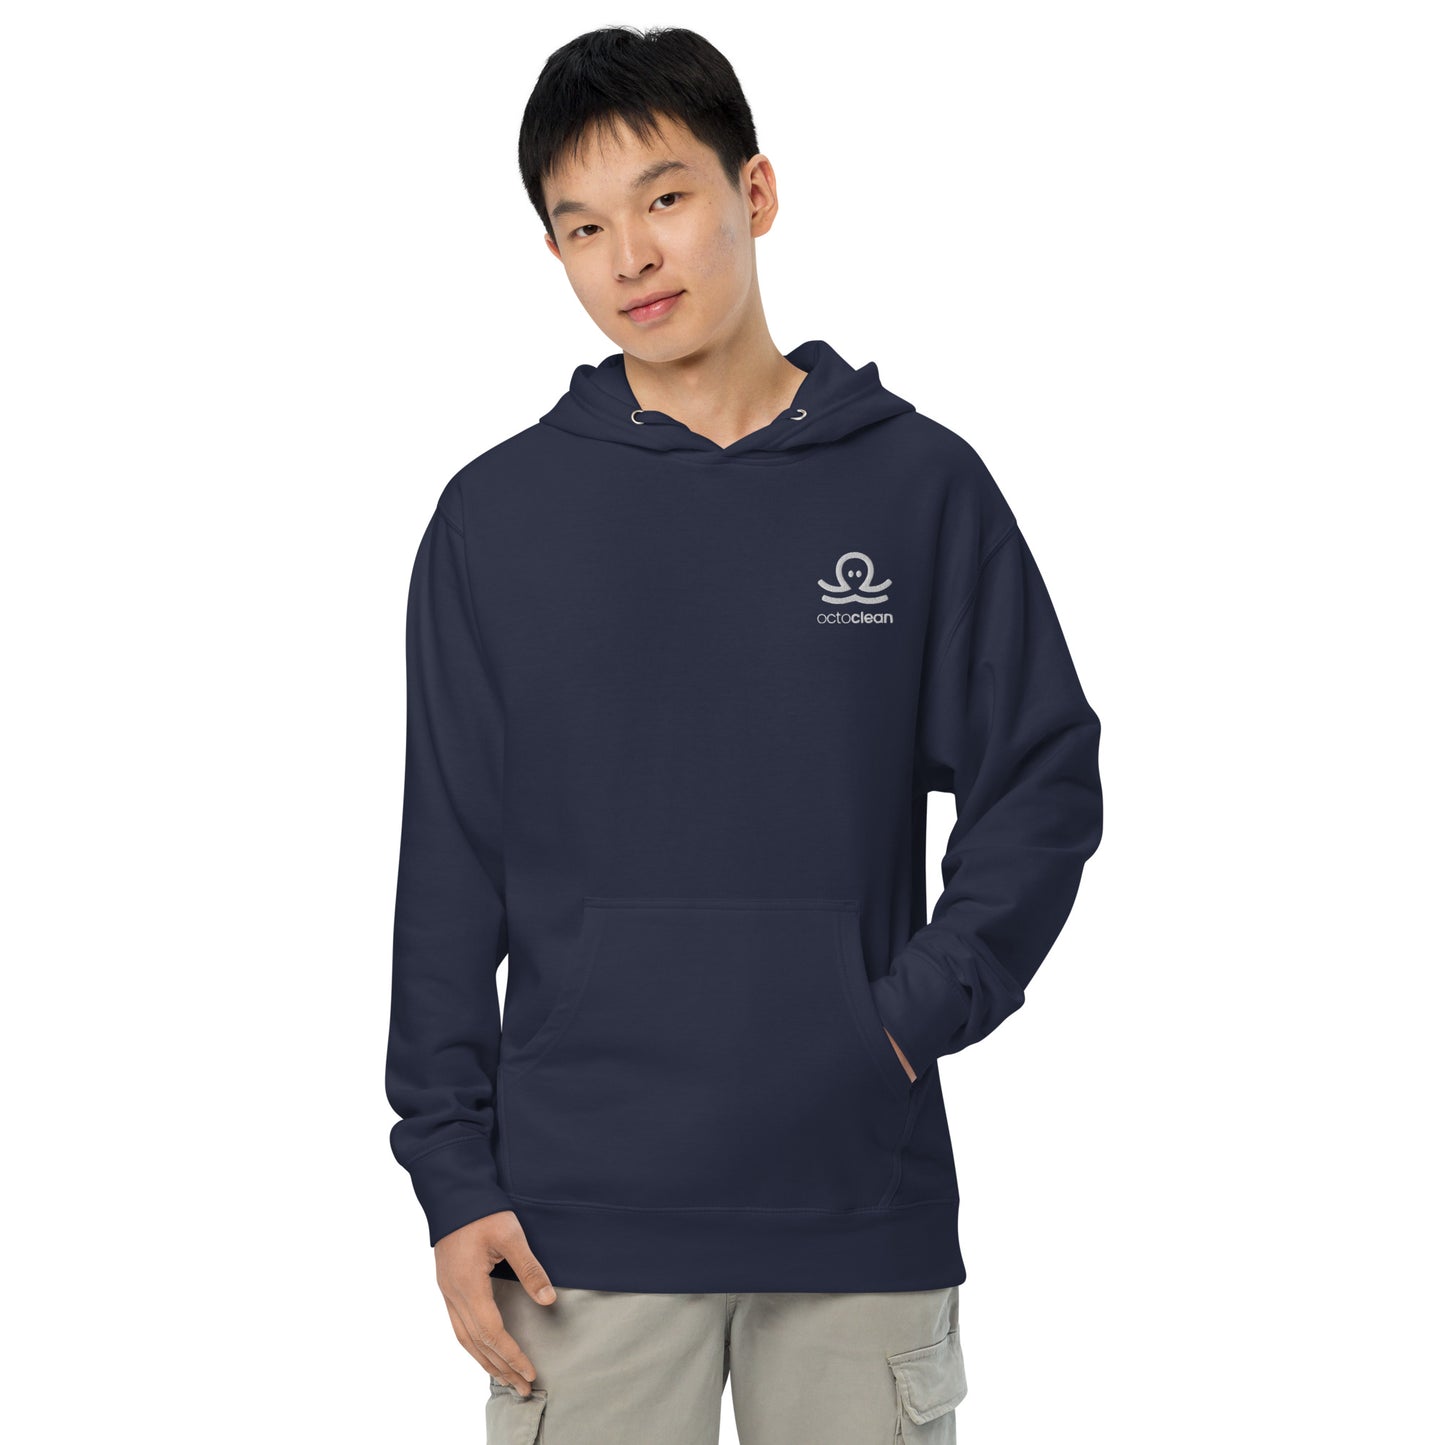 OctoClean Embroidered Unisex Midweight Hoodie